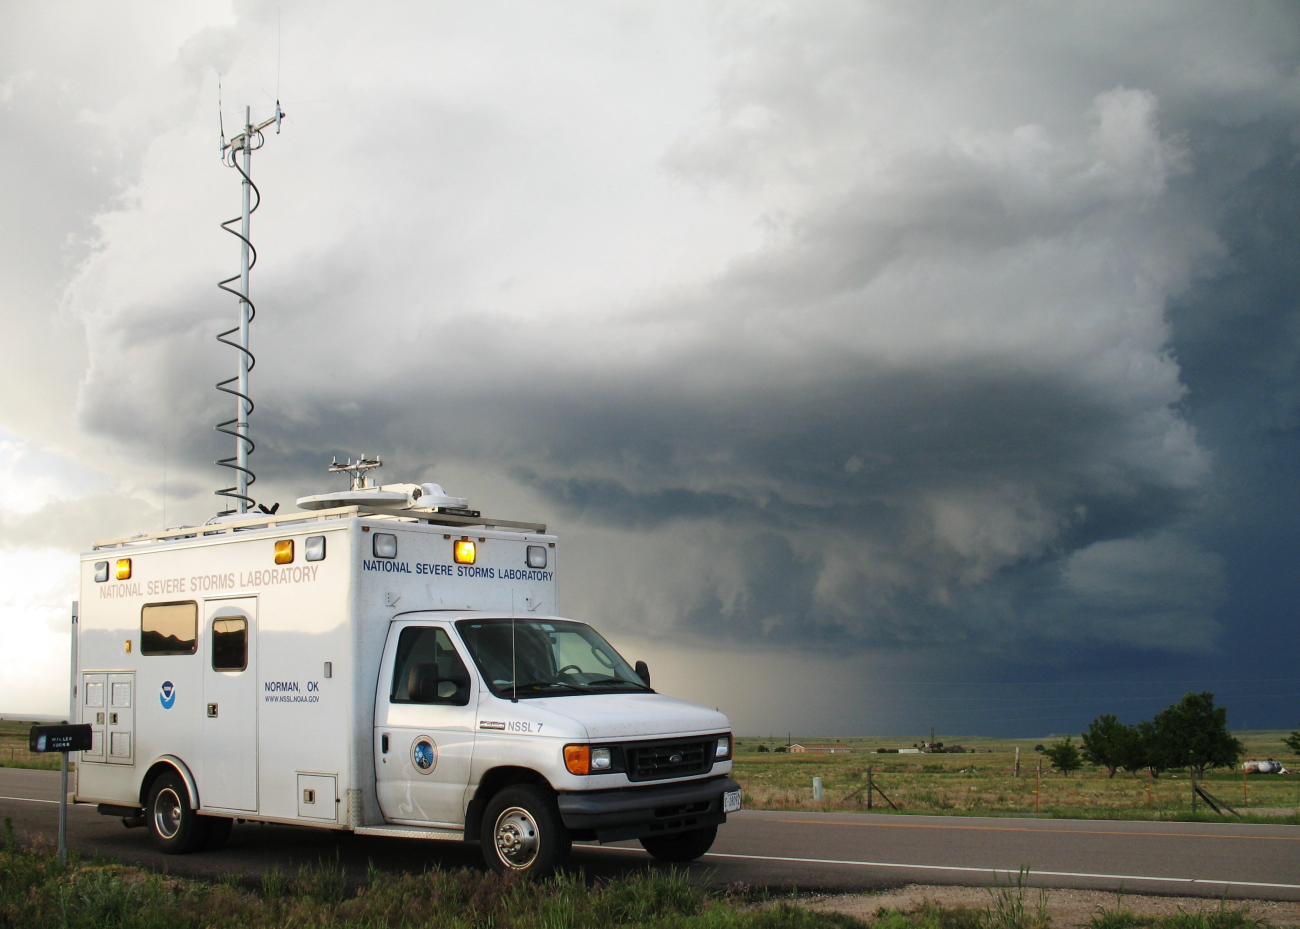 VORTEX2 field command vehicle in vicinity of thunderstorm